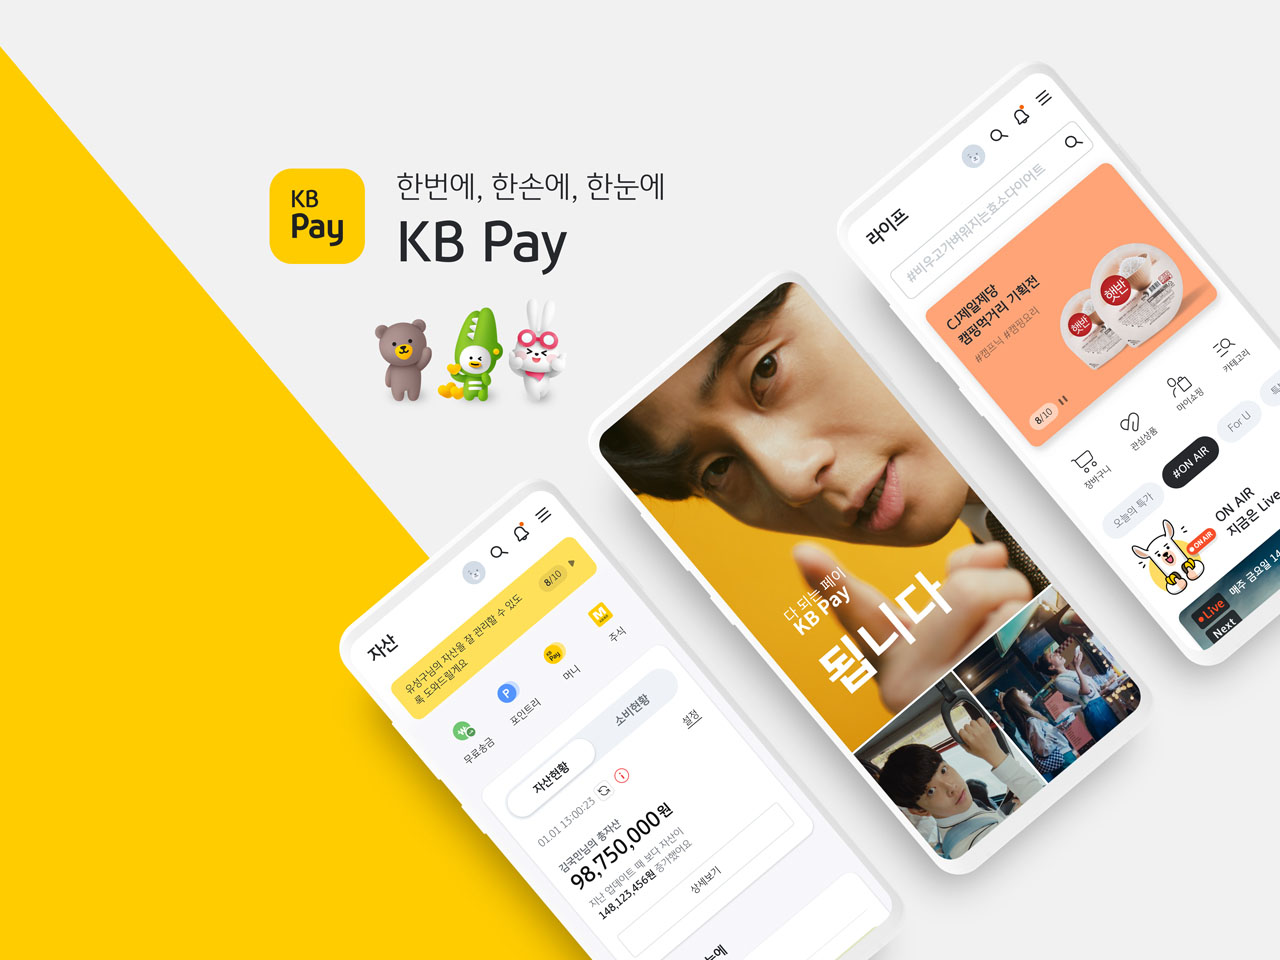 Image of KB Pay reaching 10 million customers